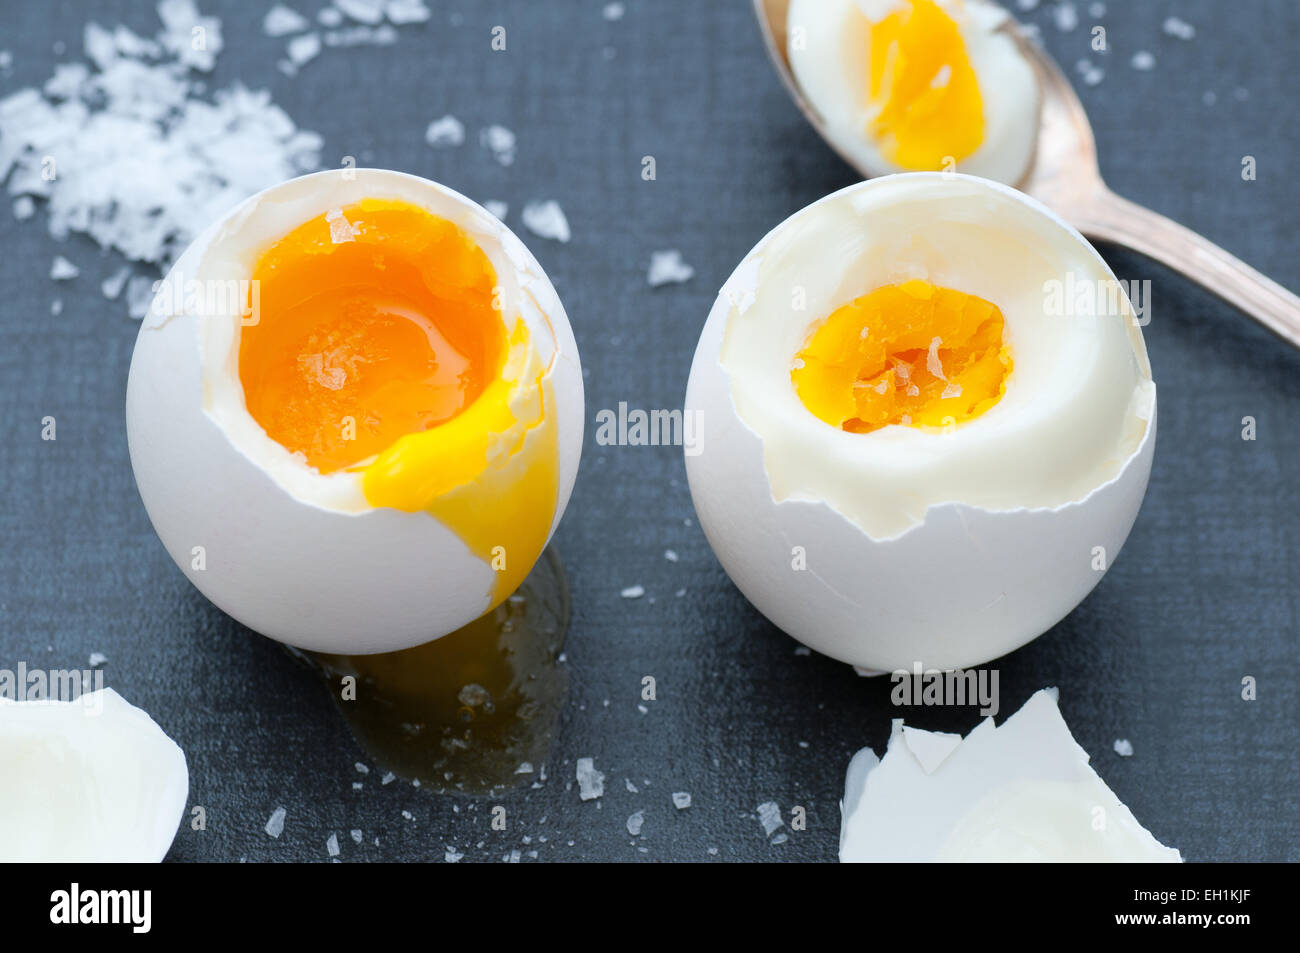 Soft boiled and hard boiled egg with sea salt. Stock Photo